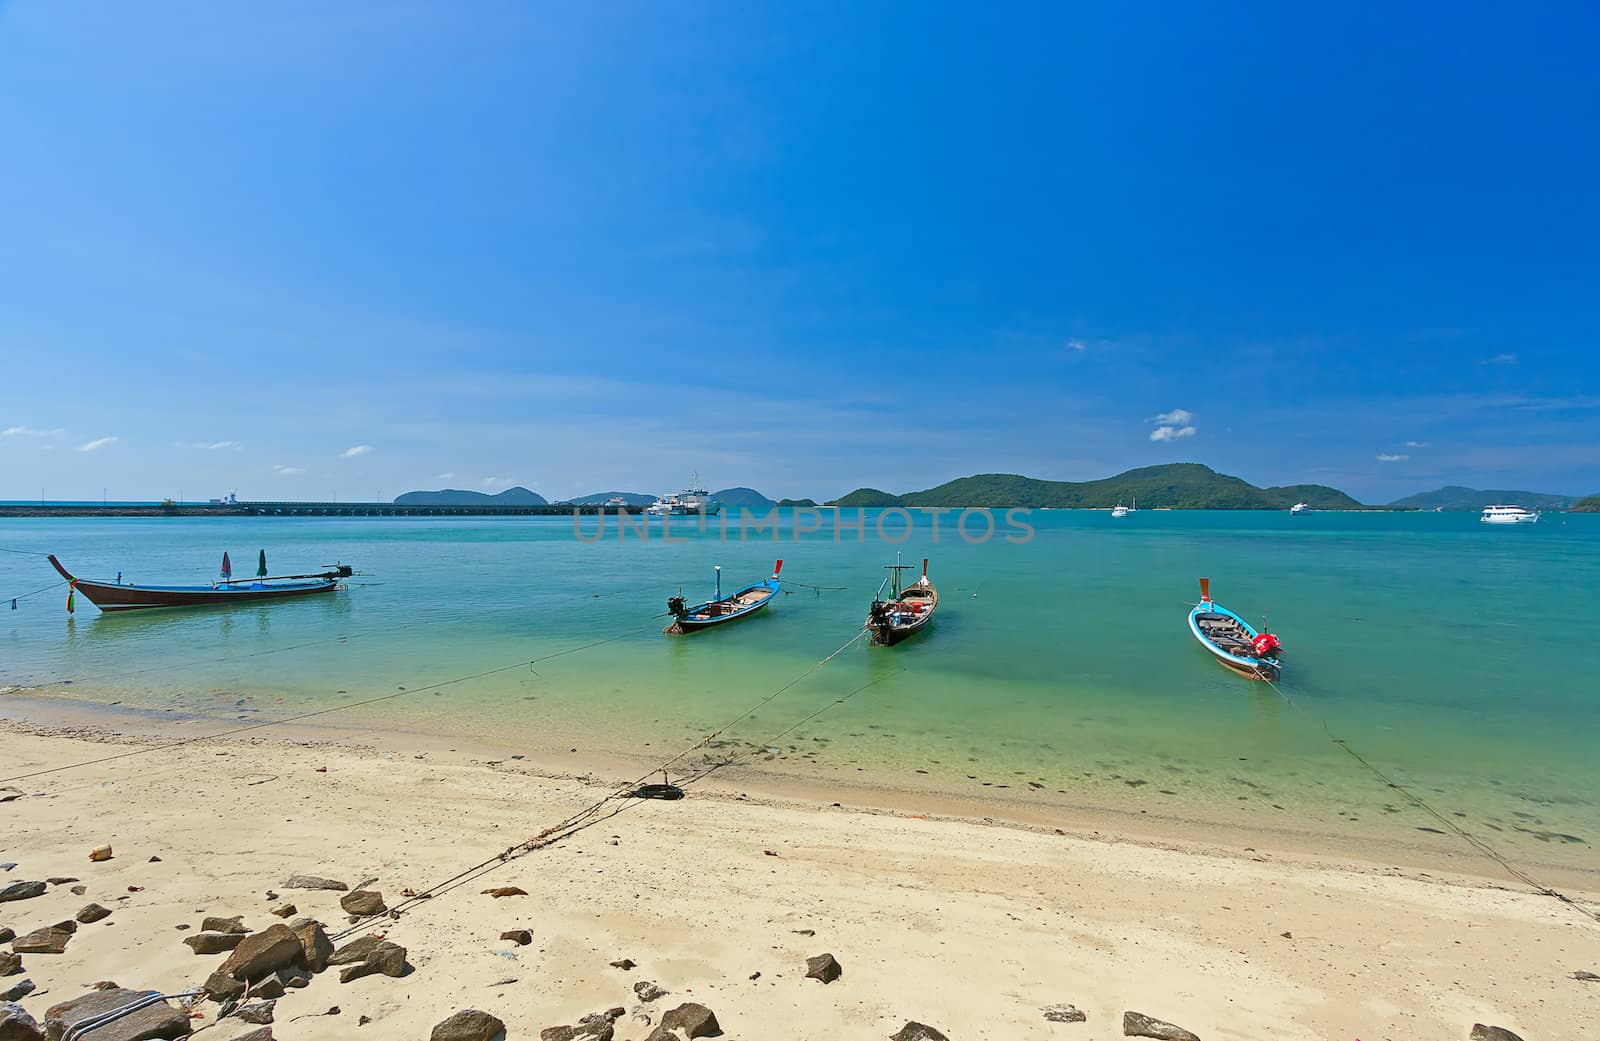 Boats near  shore waiting for tourists, Thailand. Beautiful tropical landscape.